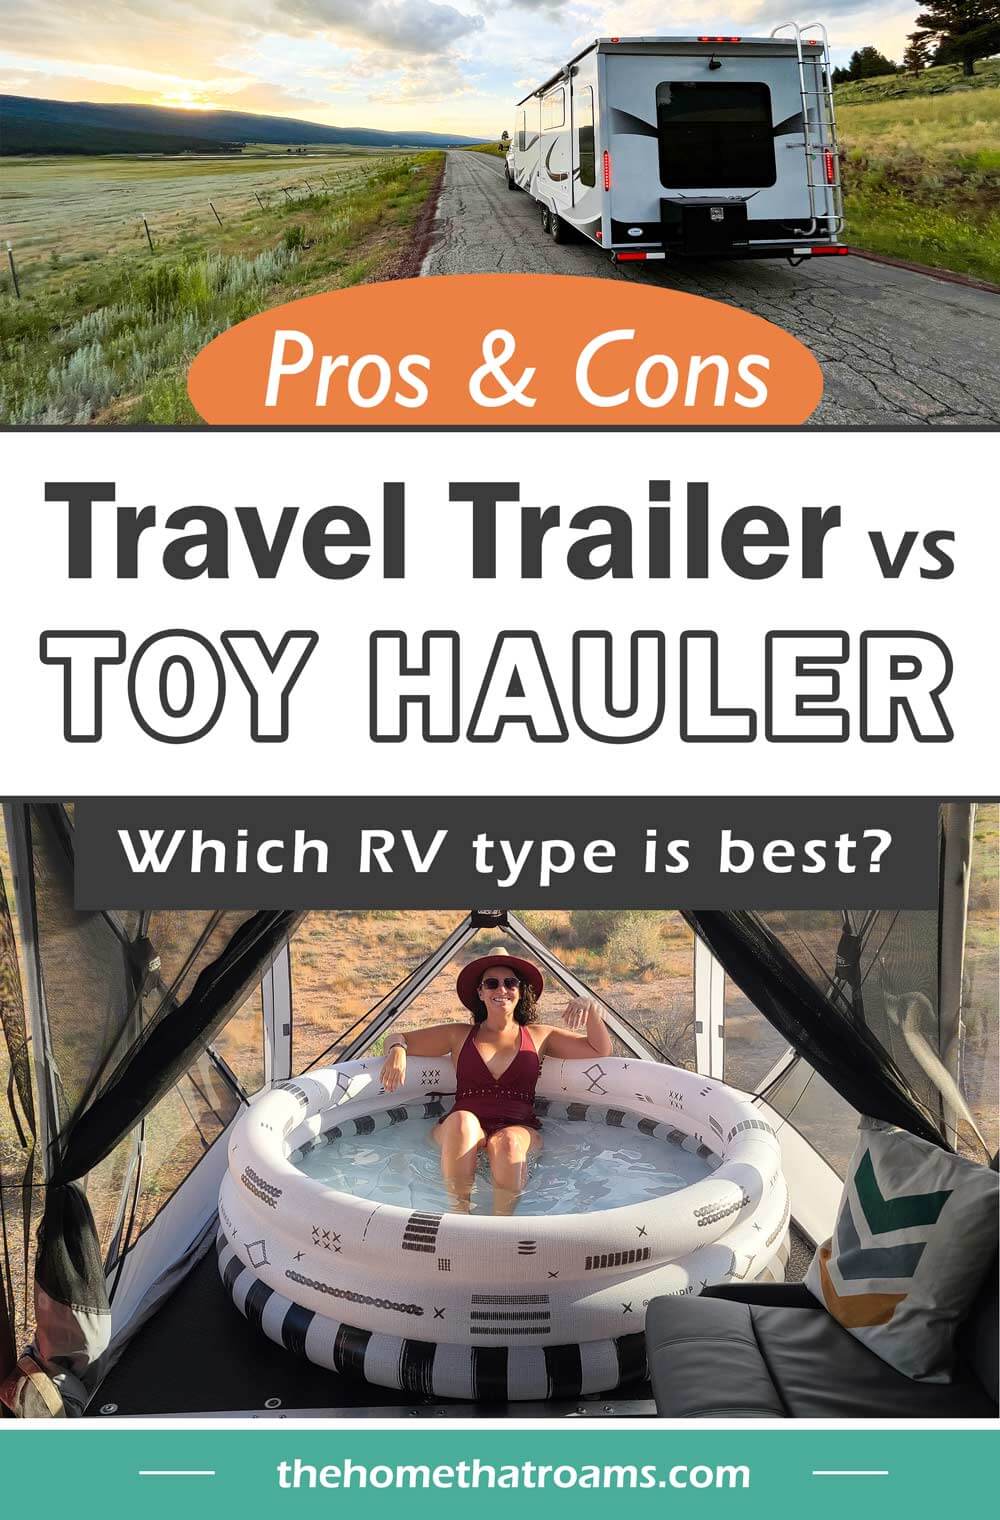 Pinterest image of travel trailer on back road (top) and patio of toy hauler (bottom). Overlayer text "Travel Trailer vs Toy Hauler, Which RV type is best?"